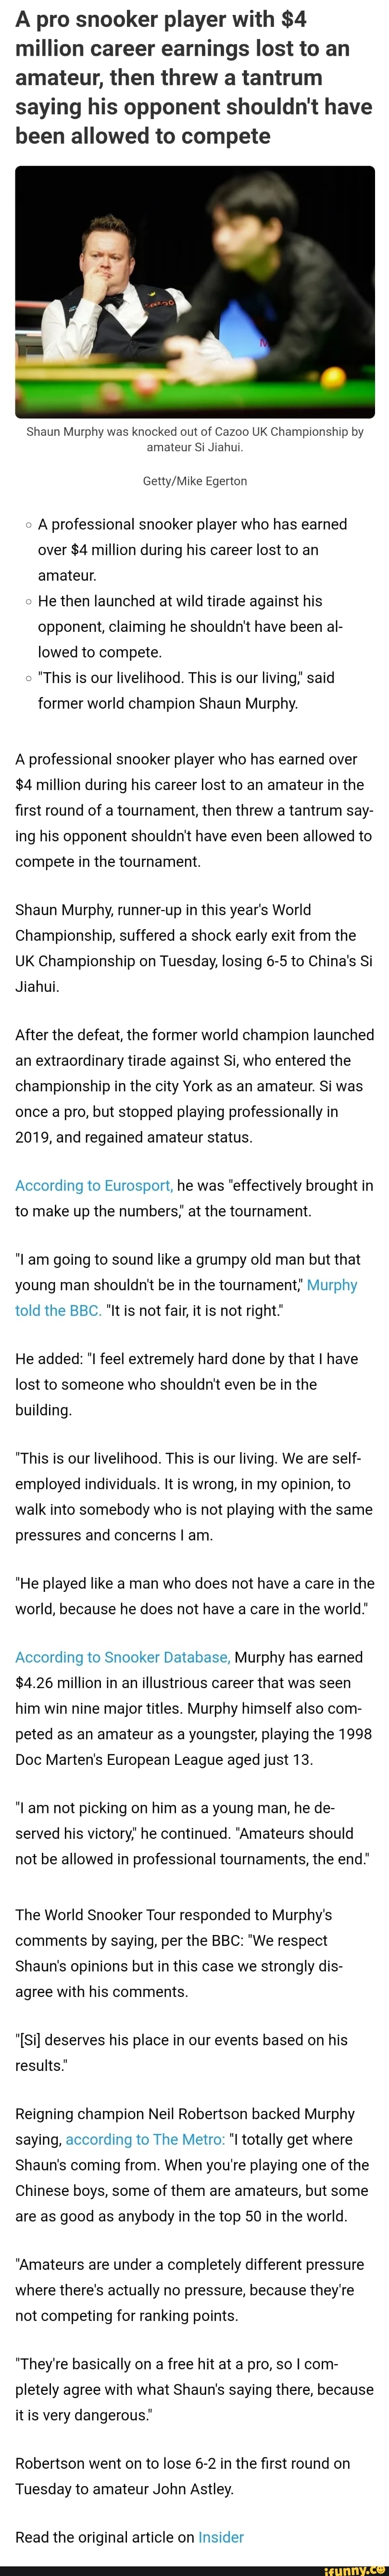 A pro snooker player with $4 million career earnings lost to an amateur, then threw a